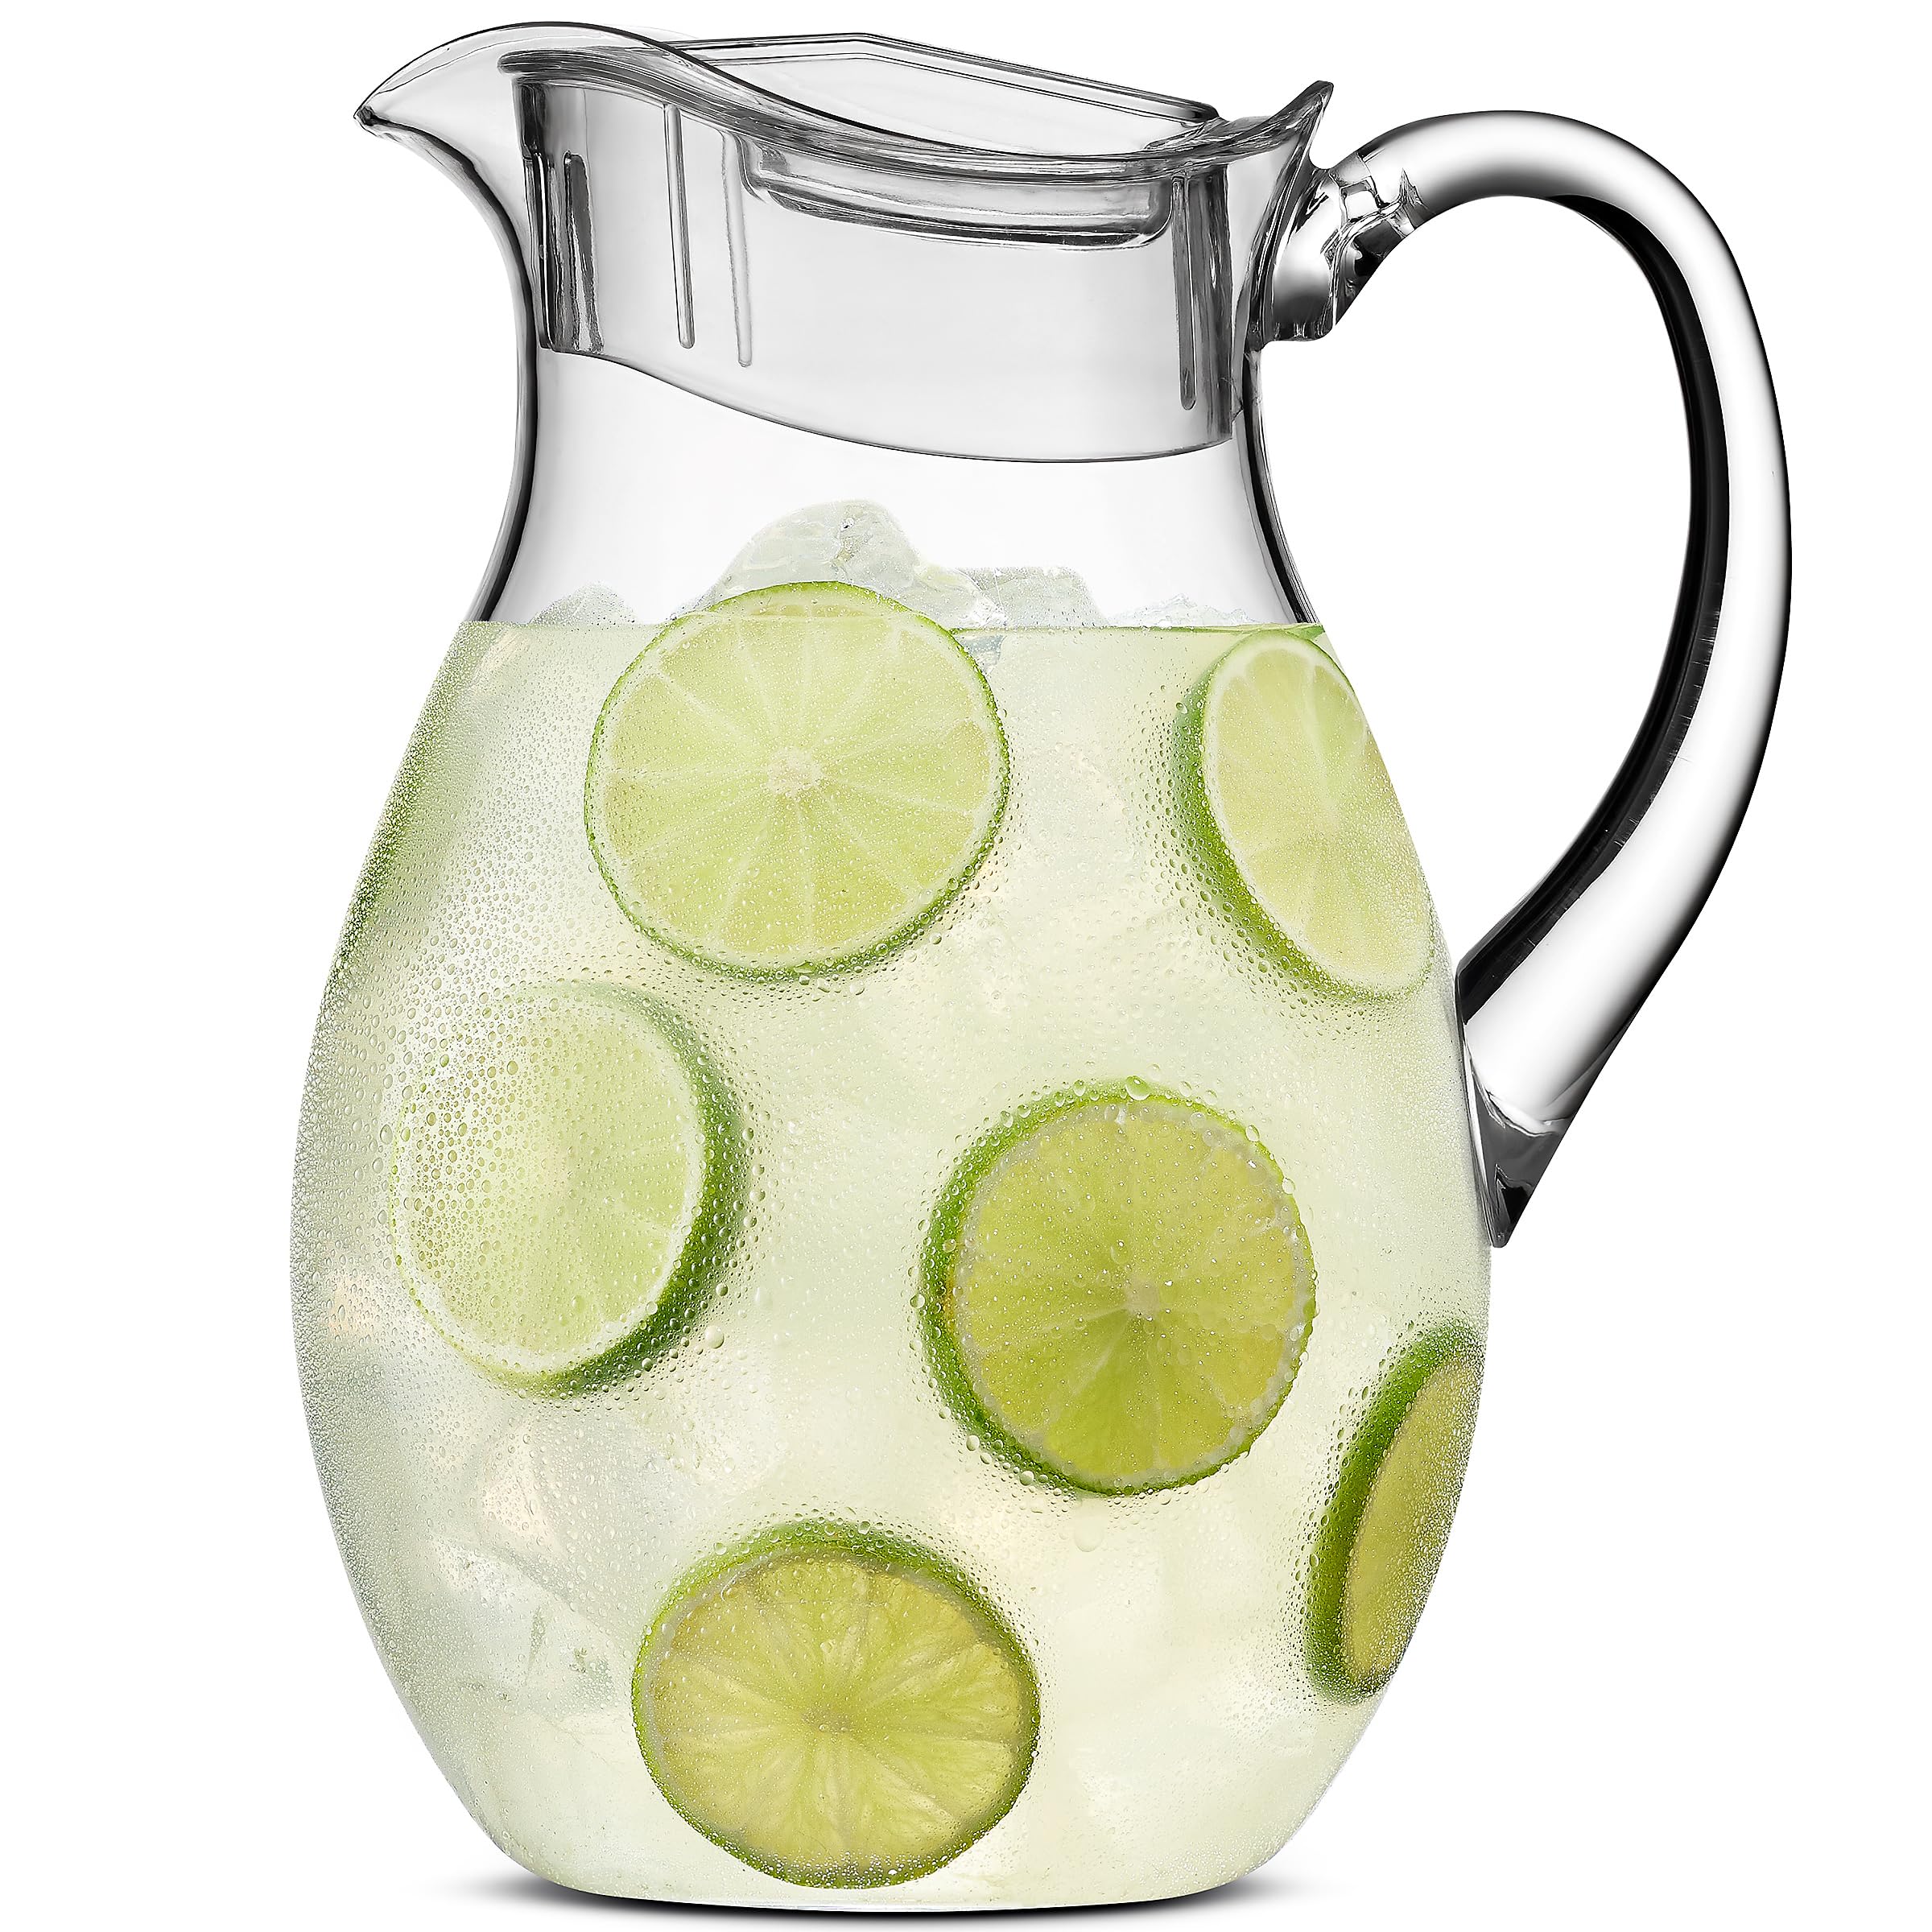 MosJos Acrylic Pitcher (72 oz), Clear Plastic, Water Pitcher with Lid, Shatterproof, BPA-Free Clear Pitcher, Ideal for Sangria, Lemonade, Juice, Iced Tea & More (Clear)  - Very Good